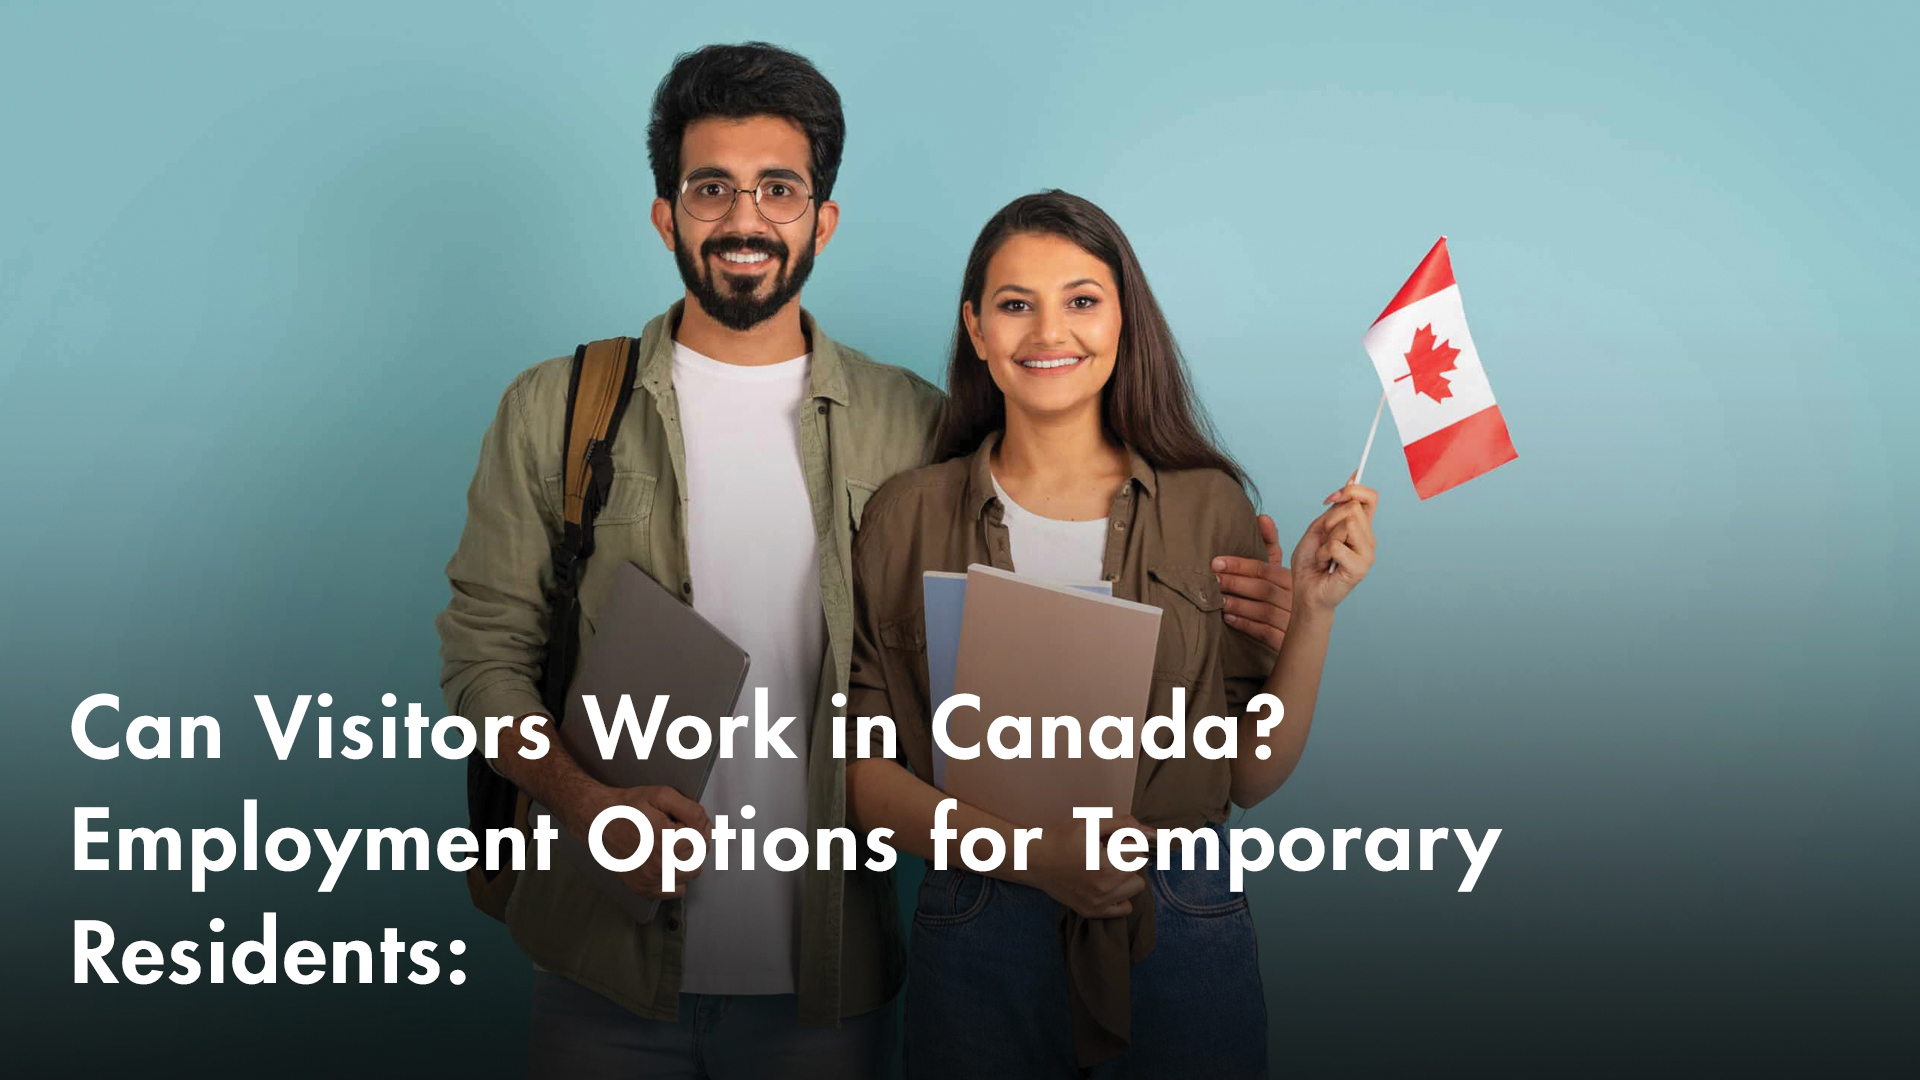 Can Visitors Work In Canada? Employment Options For Temporary Residents